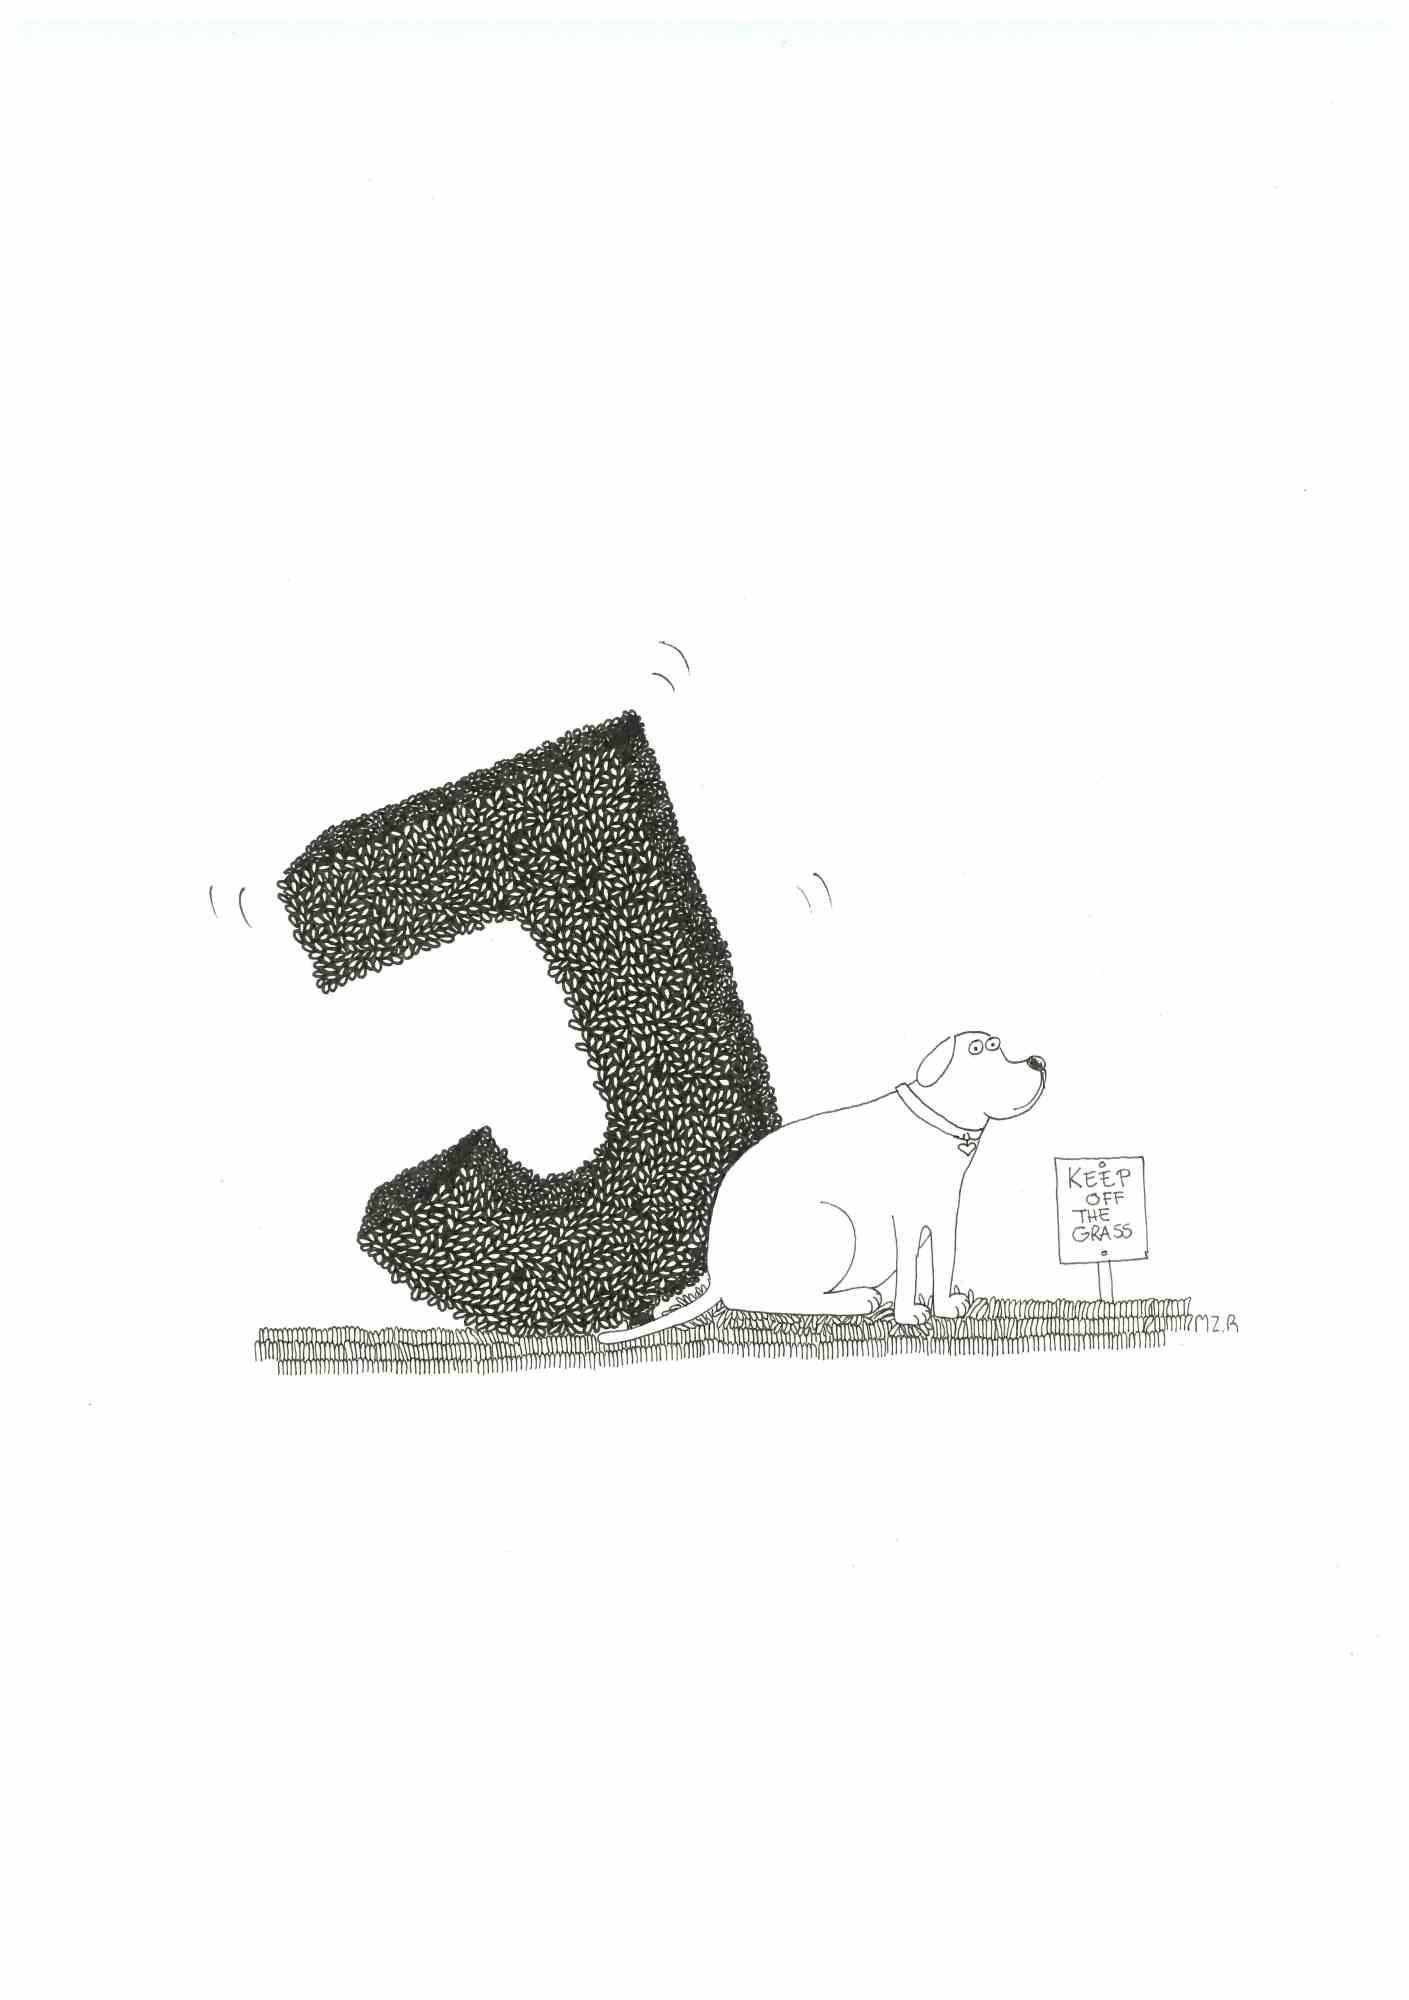 A piece of a whimsical alphabet that consists of 29 letters. Original work. Fineliner on paper. Inspired by a famous Villa Borghese park in Rome